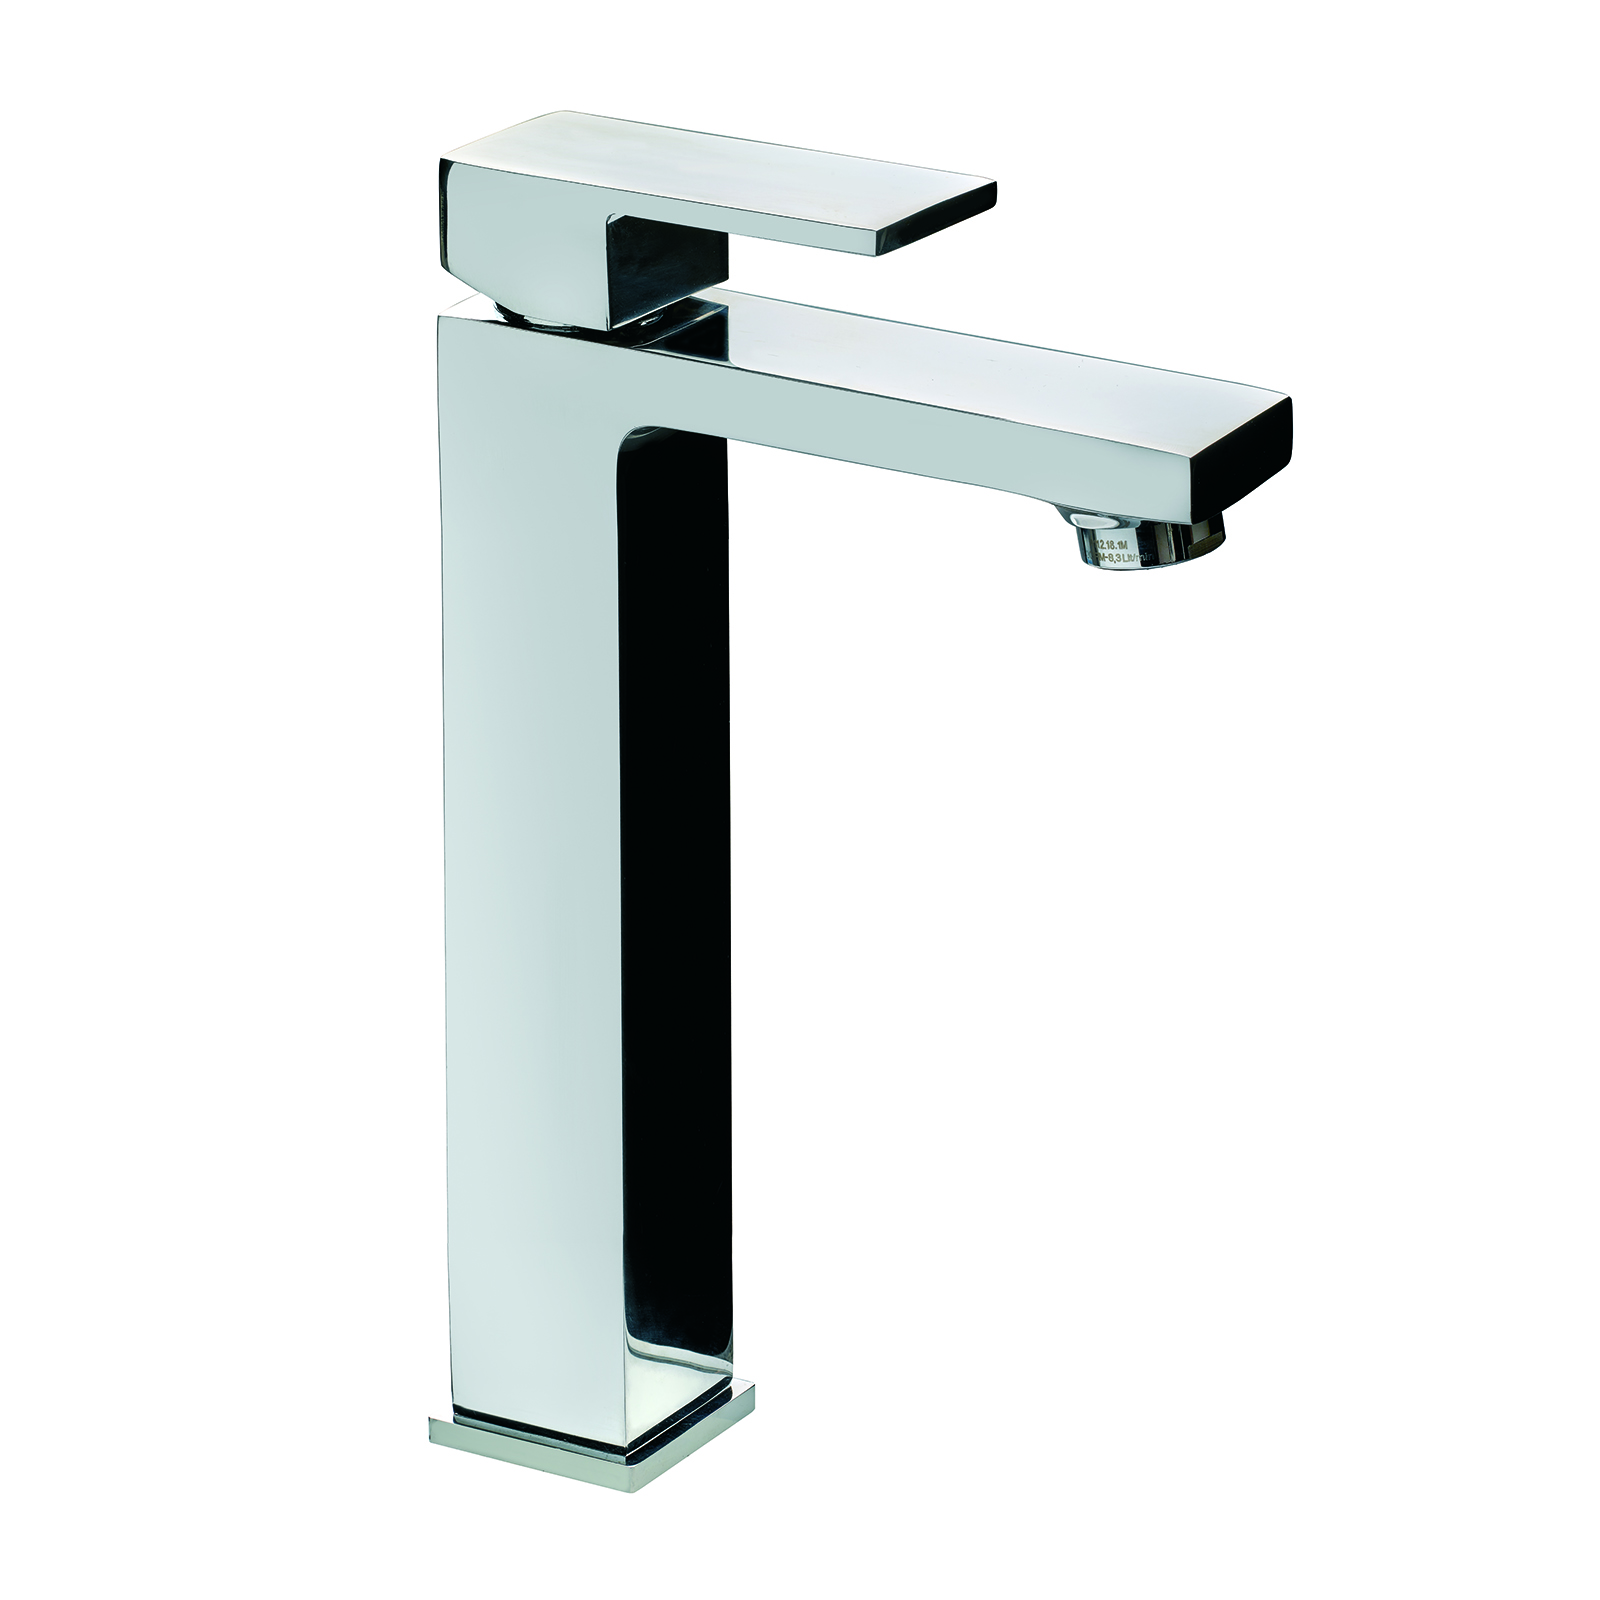 Tall single-control mixer for washbasin spout and CLICK-CLACK waste